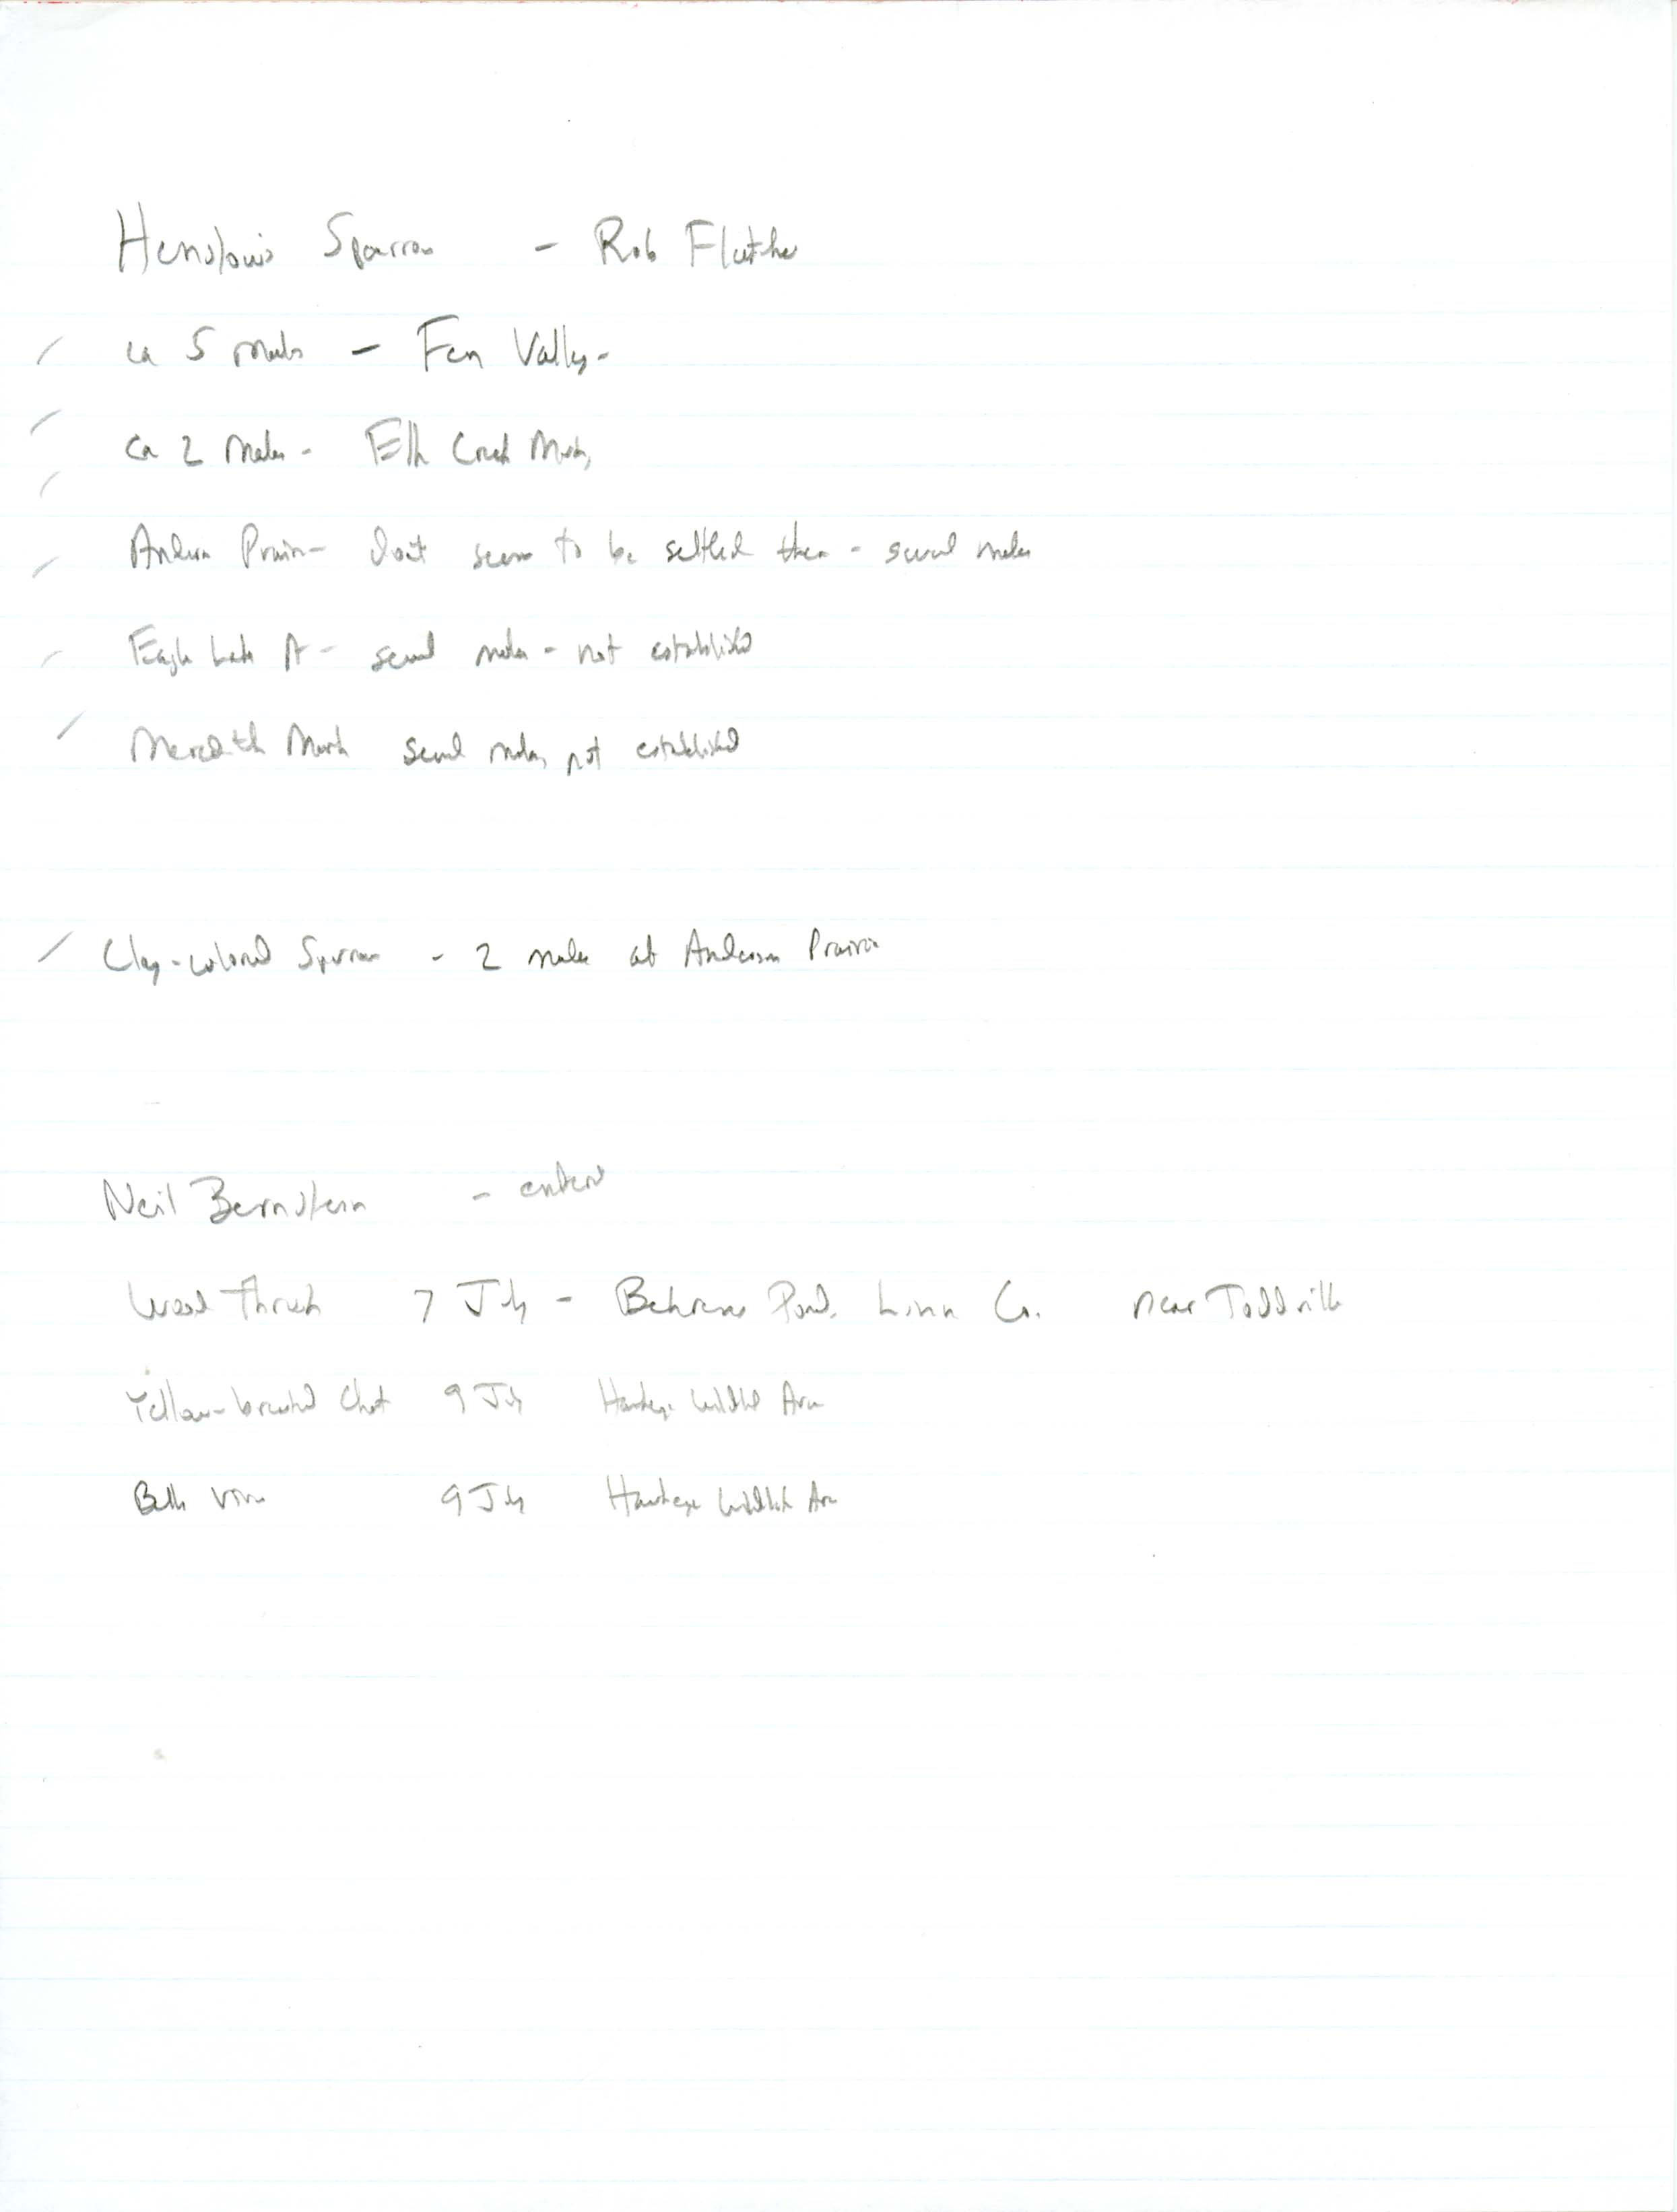 Annotated bird sighting list for summer 1999 compiled by Rob Fletcher